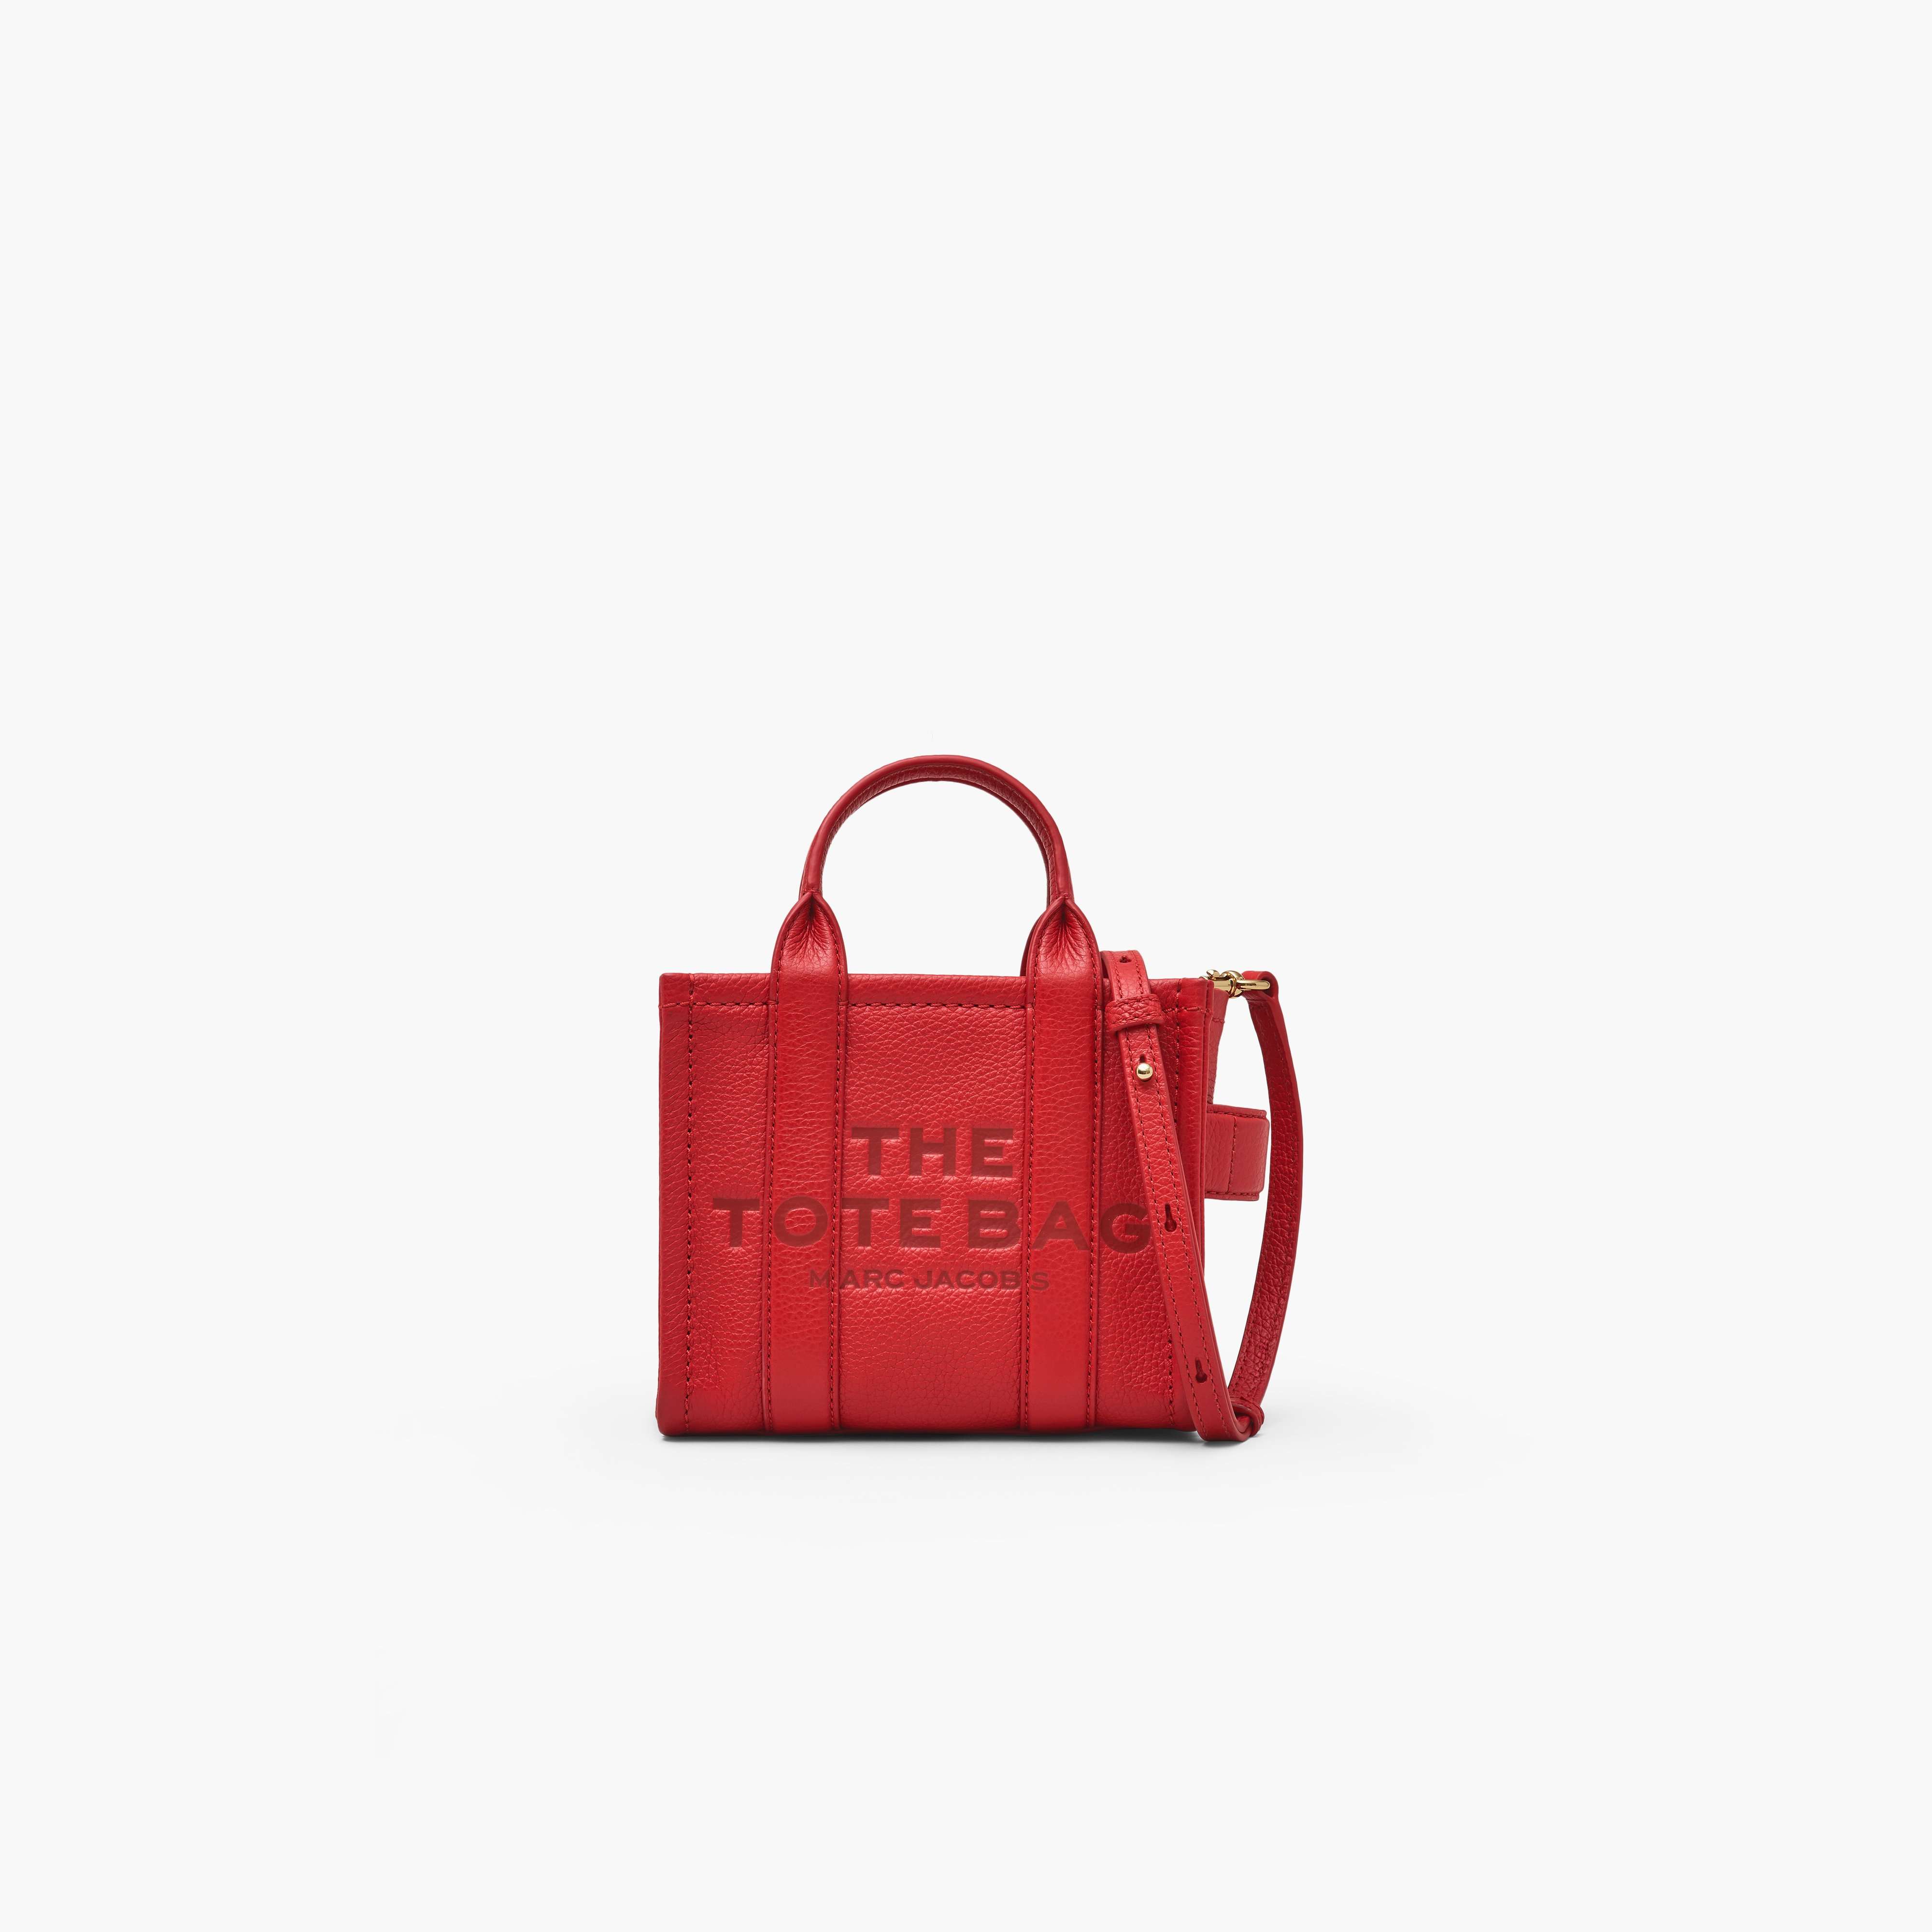 The Leather Crossbody Tote Bag in True Red